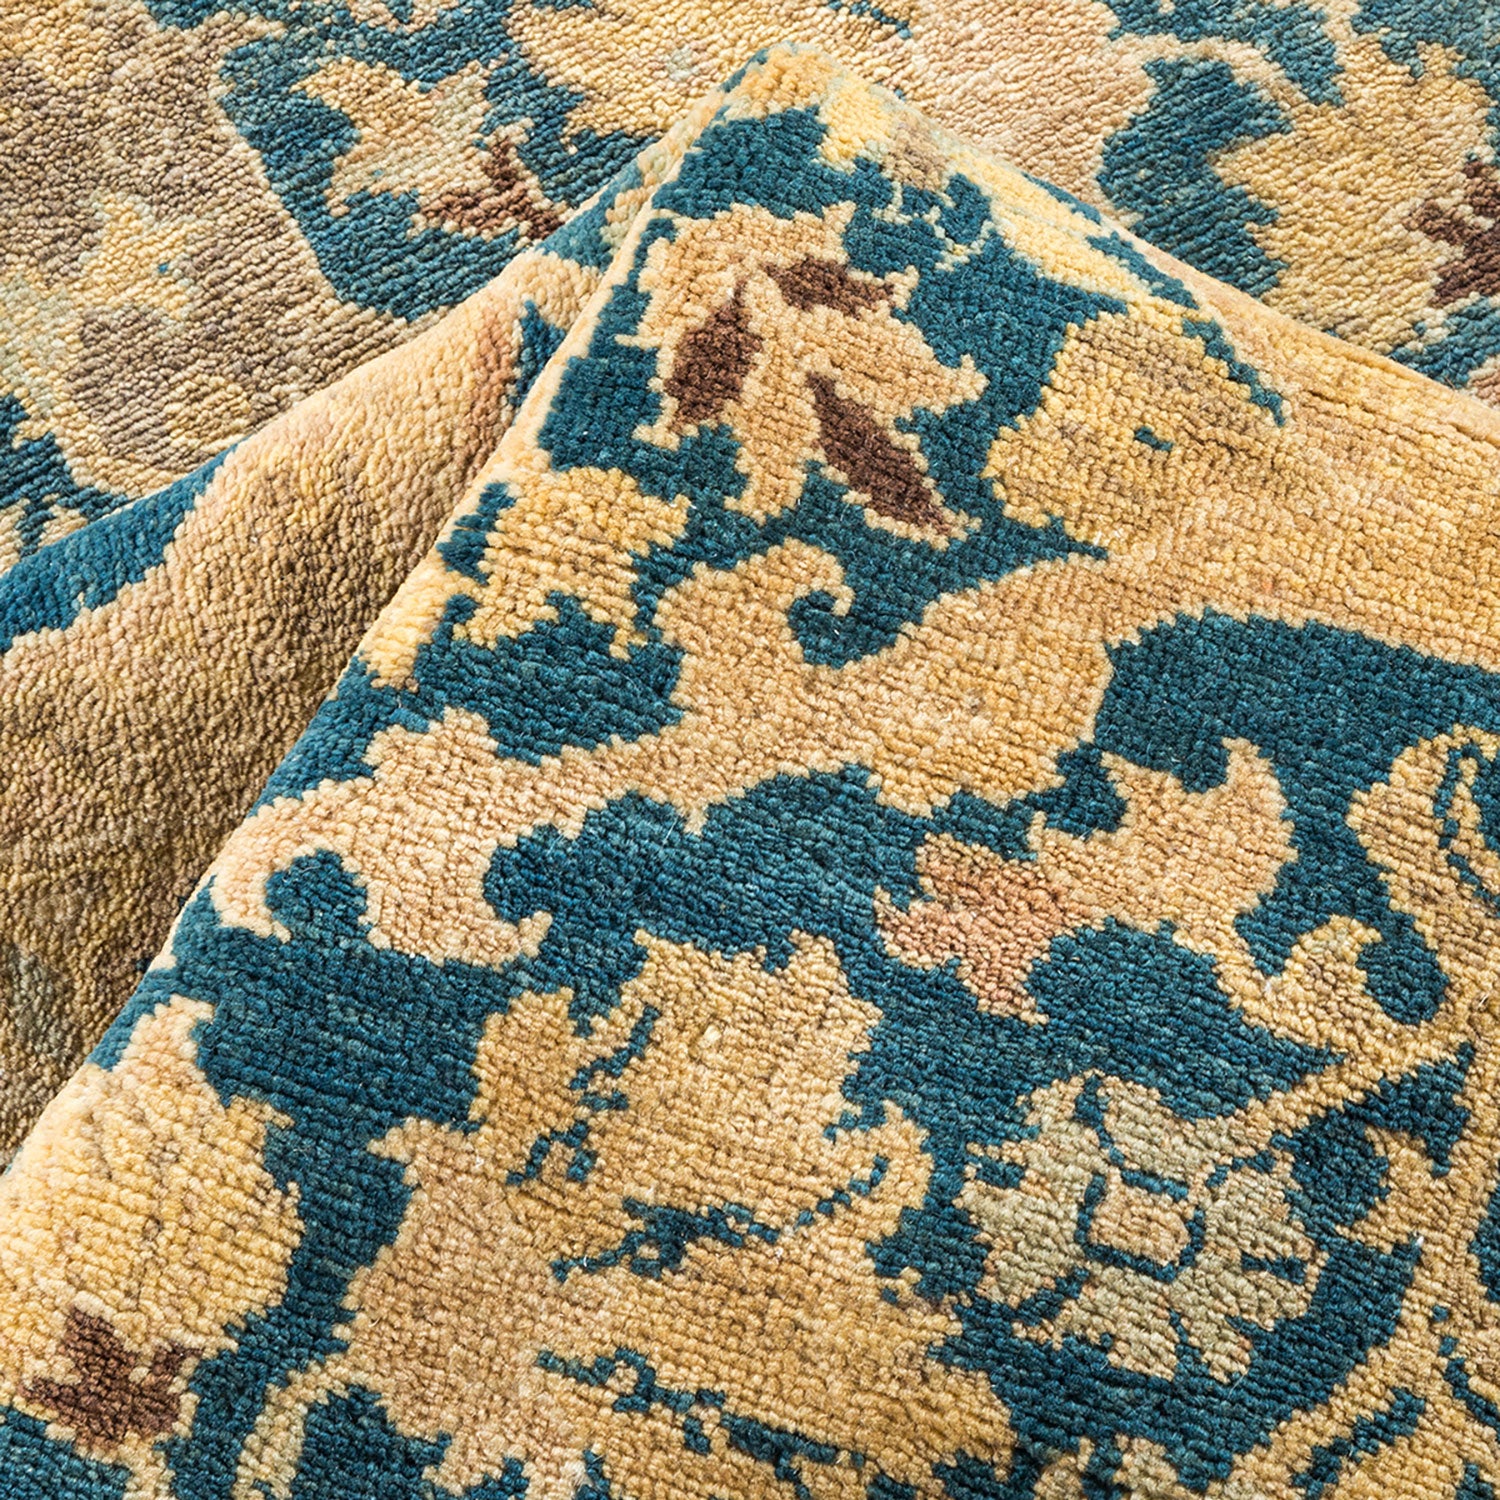 Close-up of a plush, ornate carpet with intricate floral motifs.